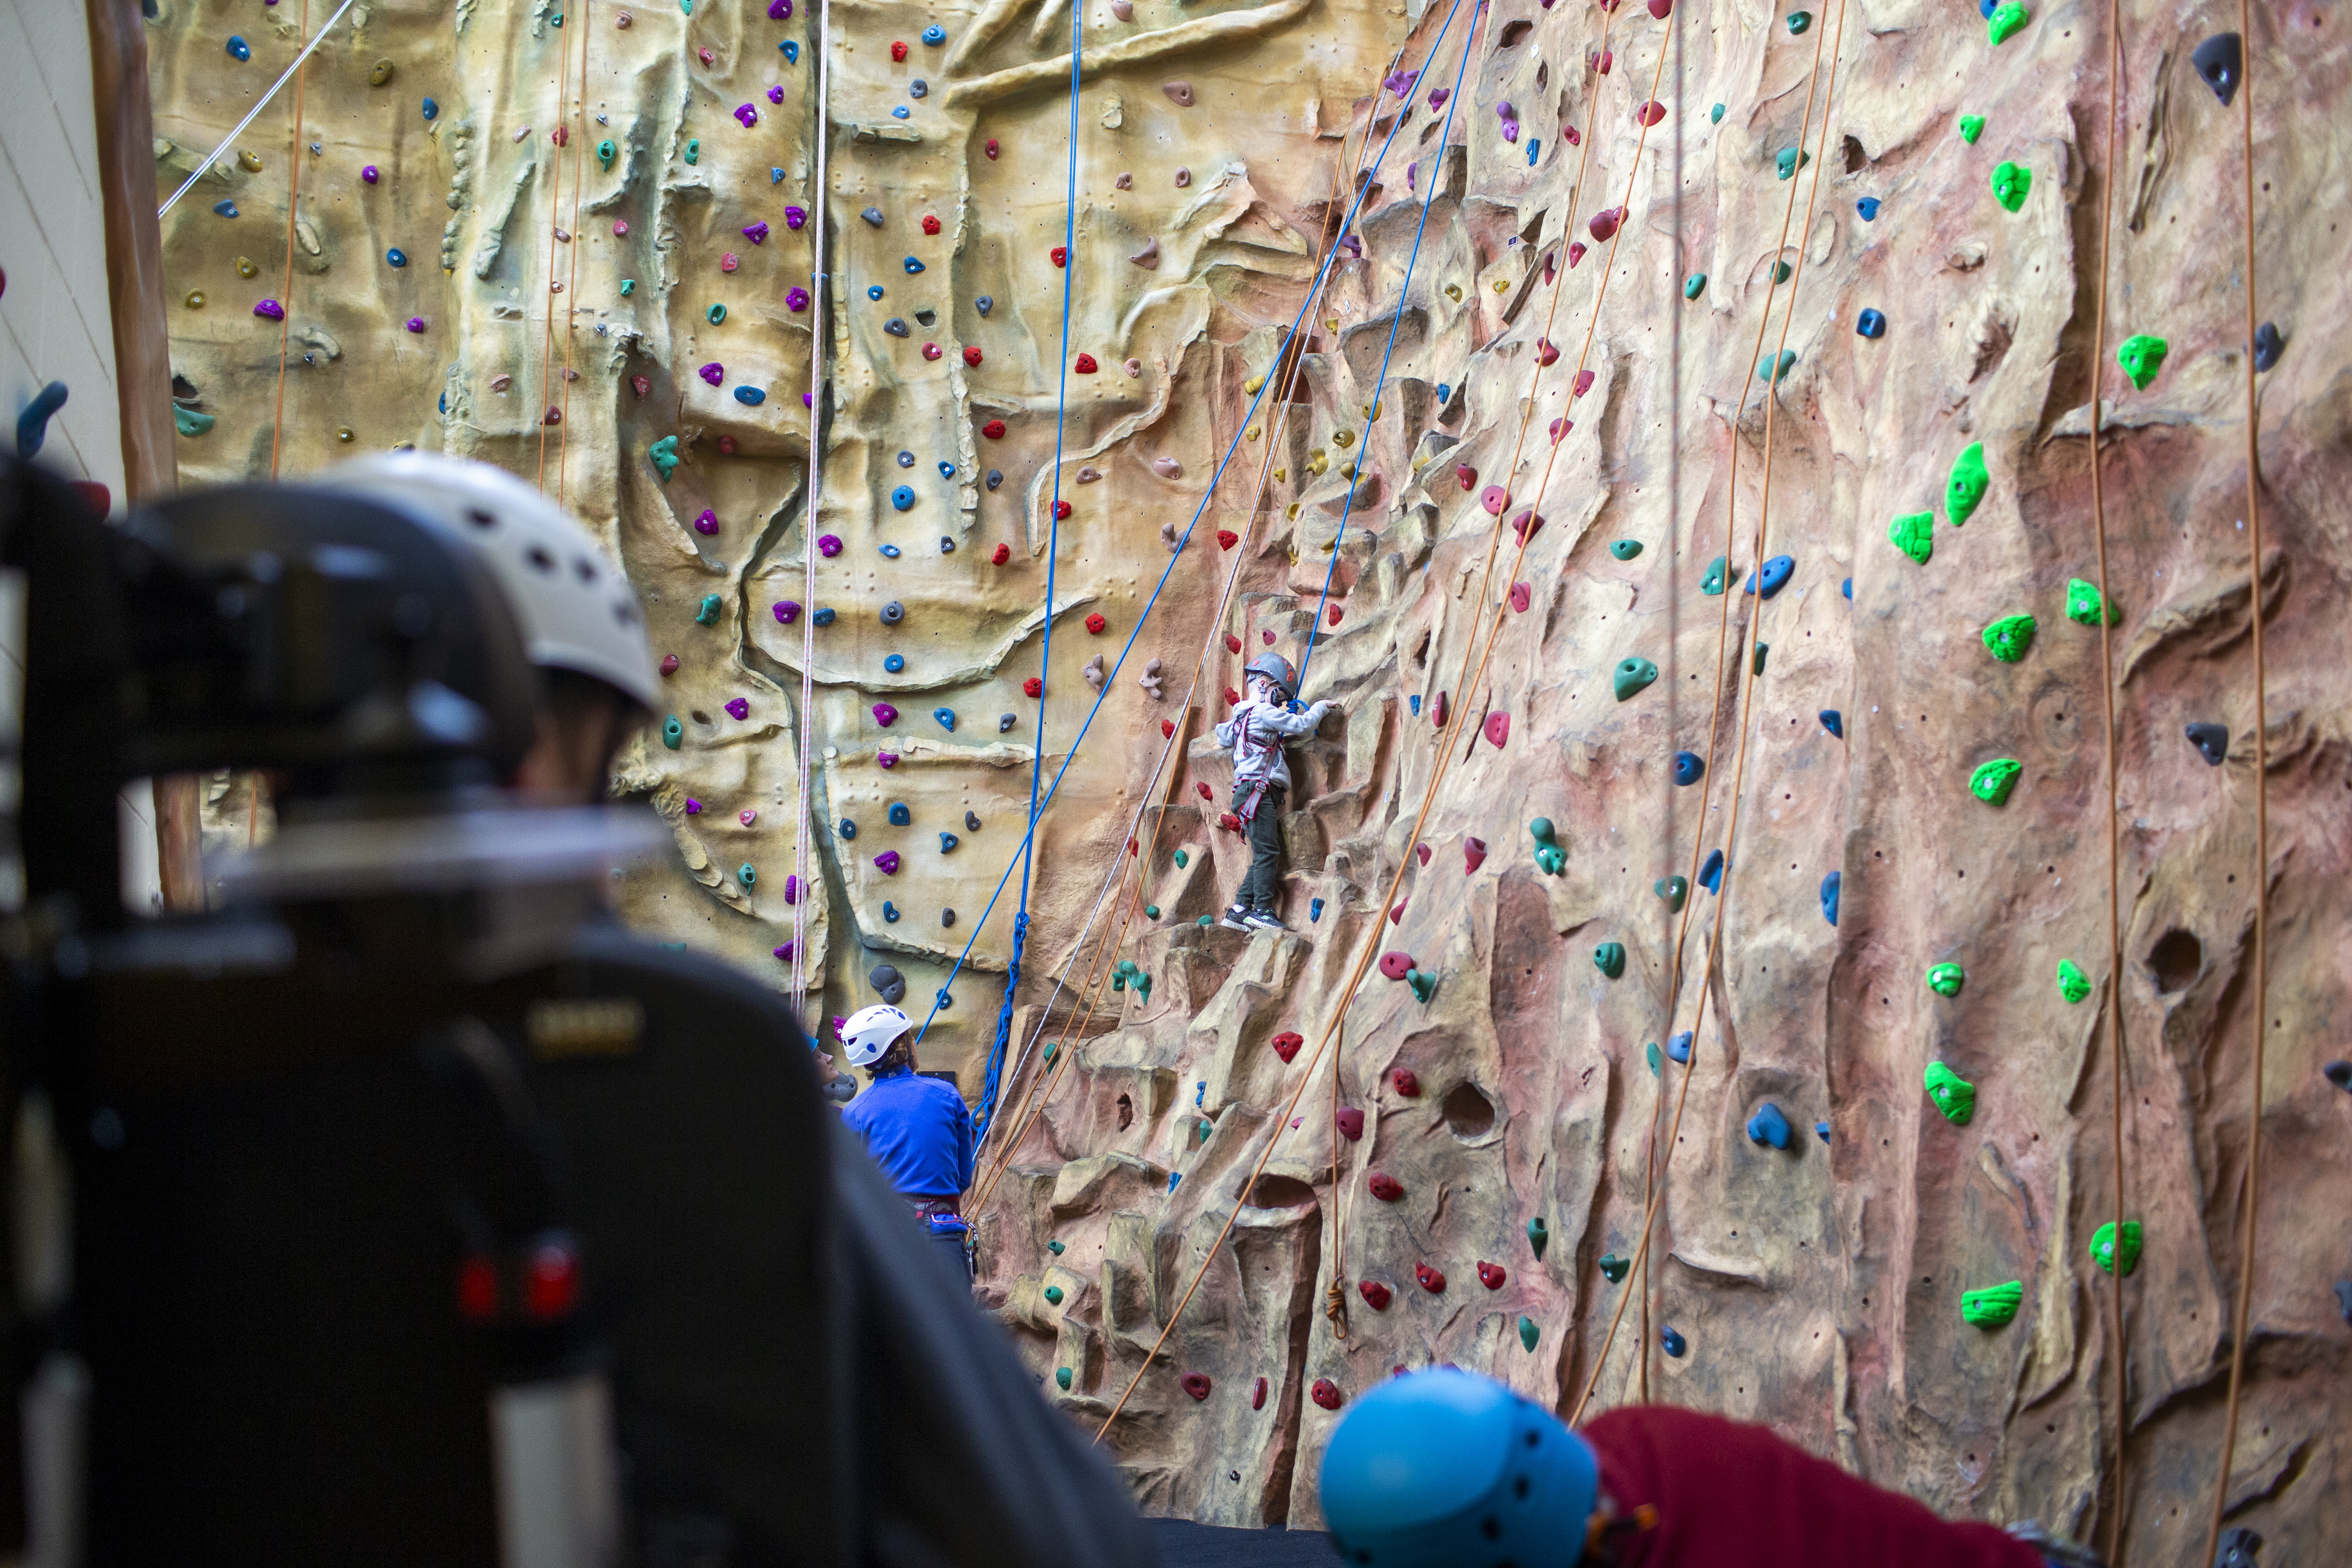 A large rock climbing wall that a child is scaling